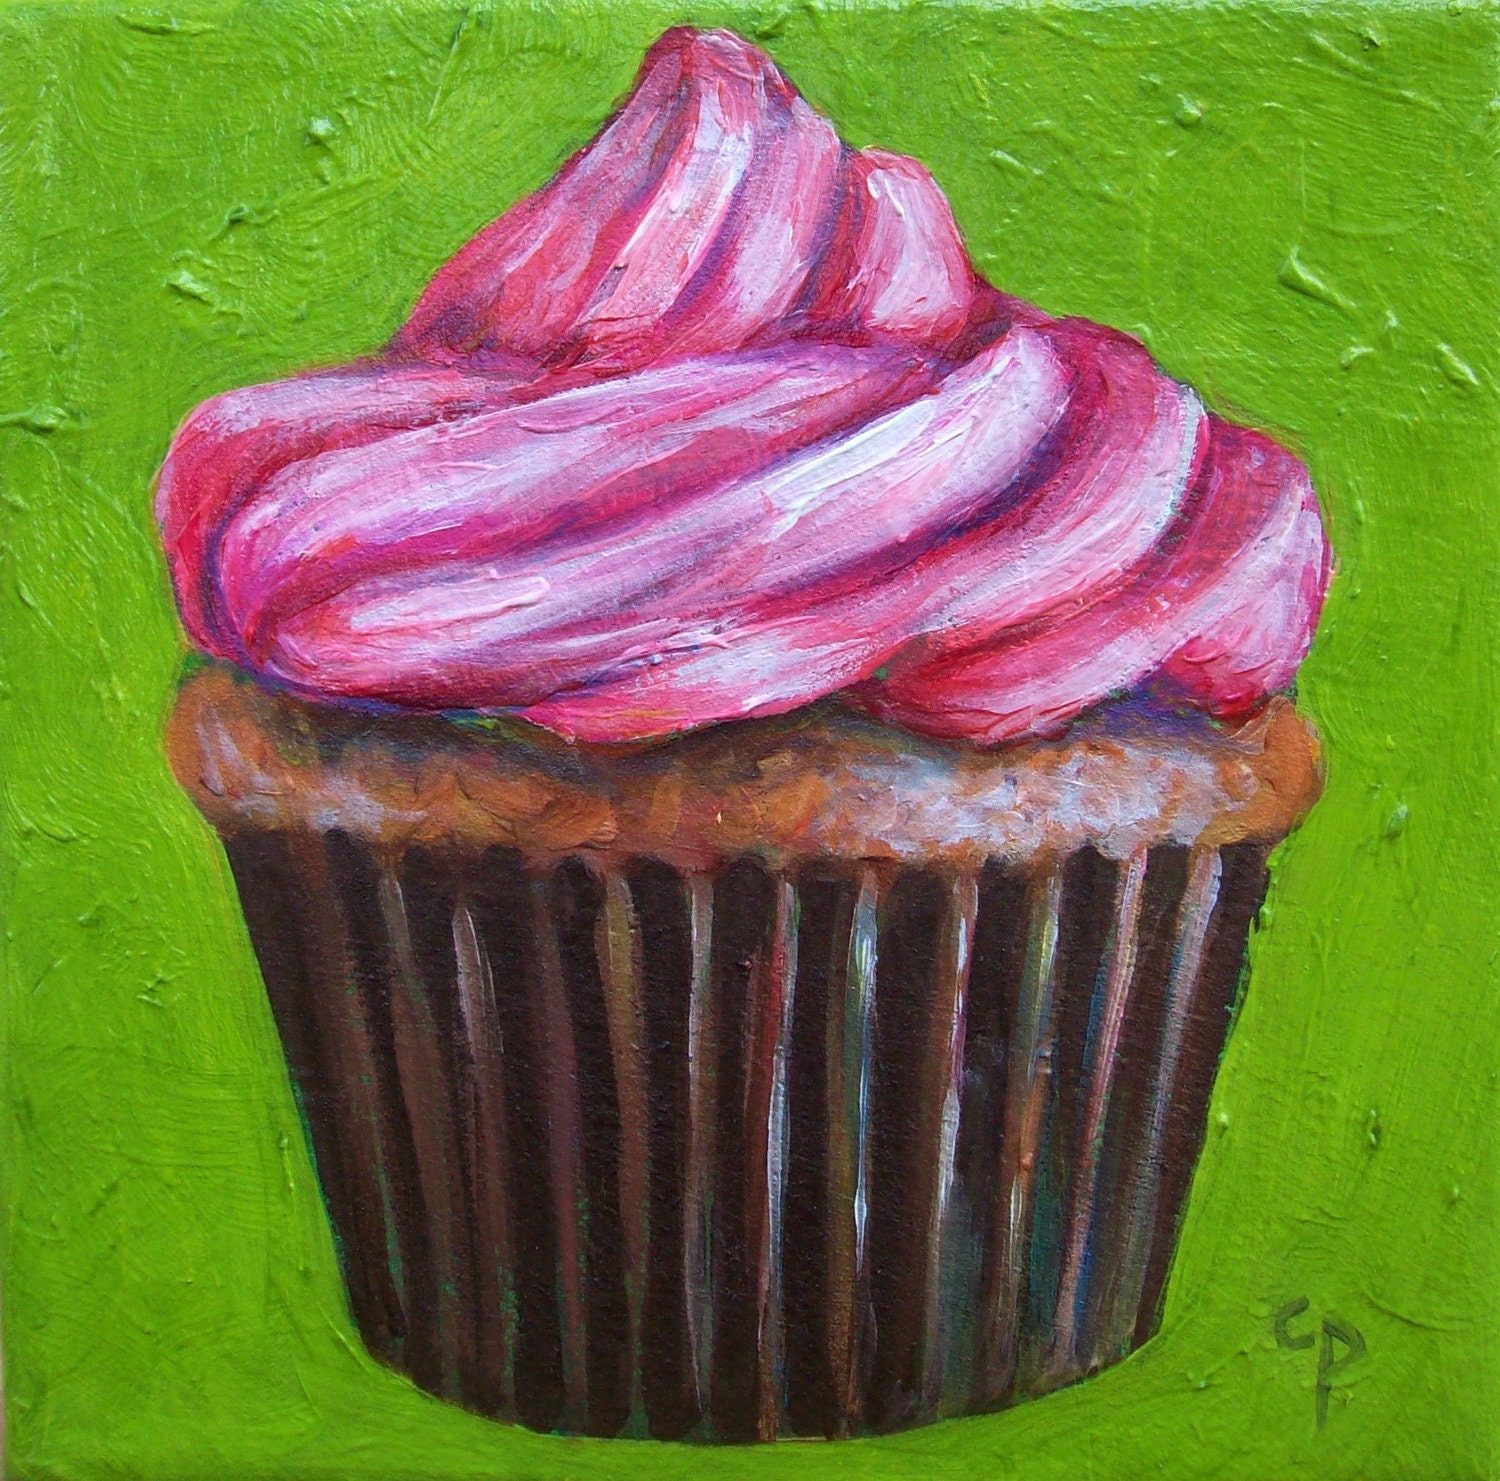 Original oil painting- Sweet cupcake, 6x6 on canvas, ready to hang